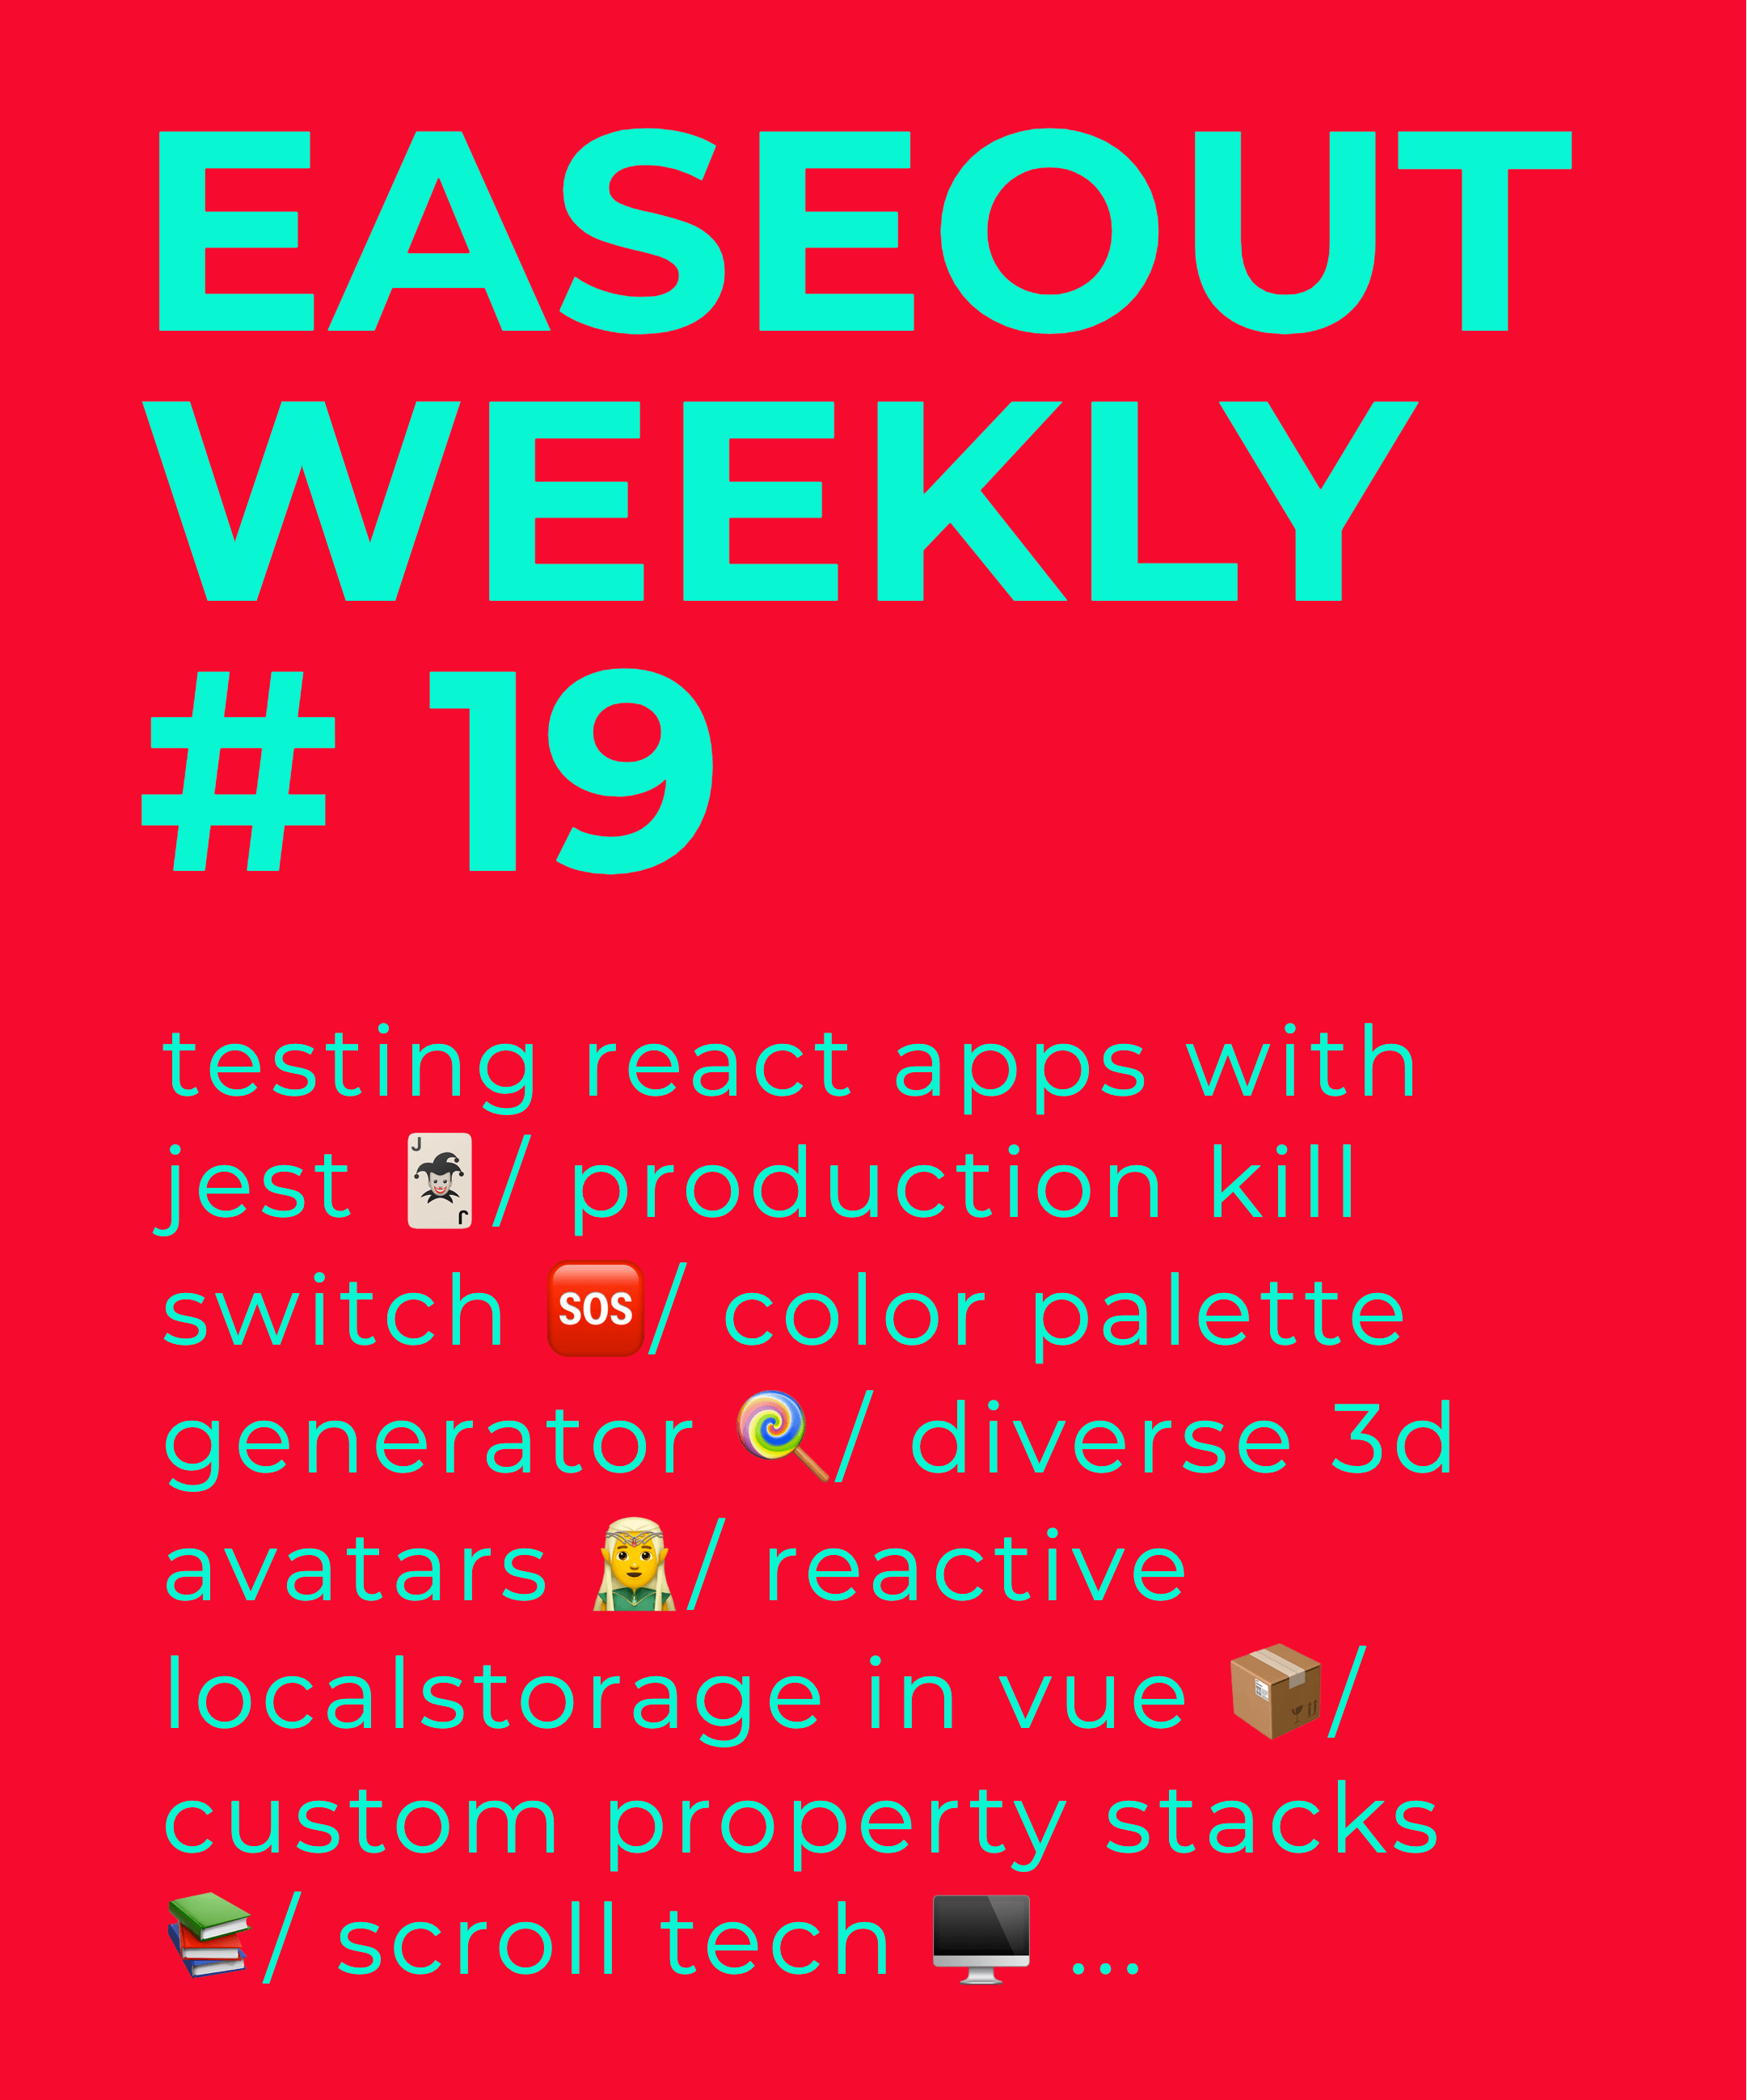 Easeout Weekly #19